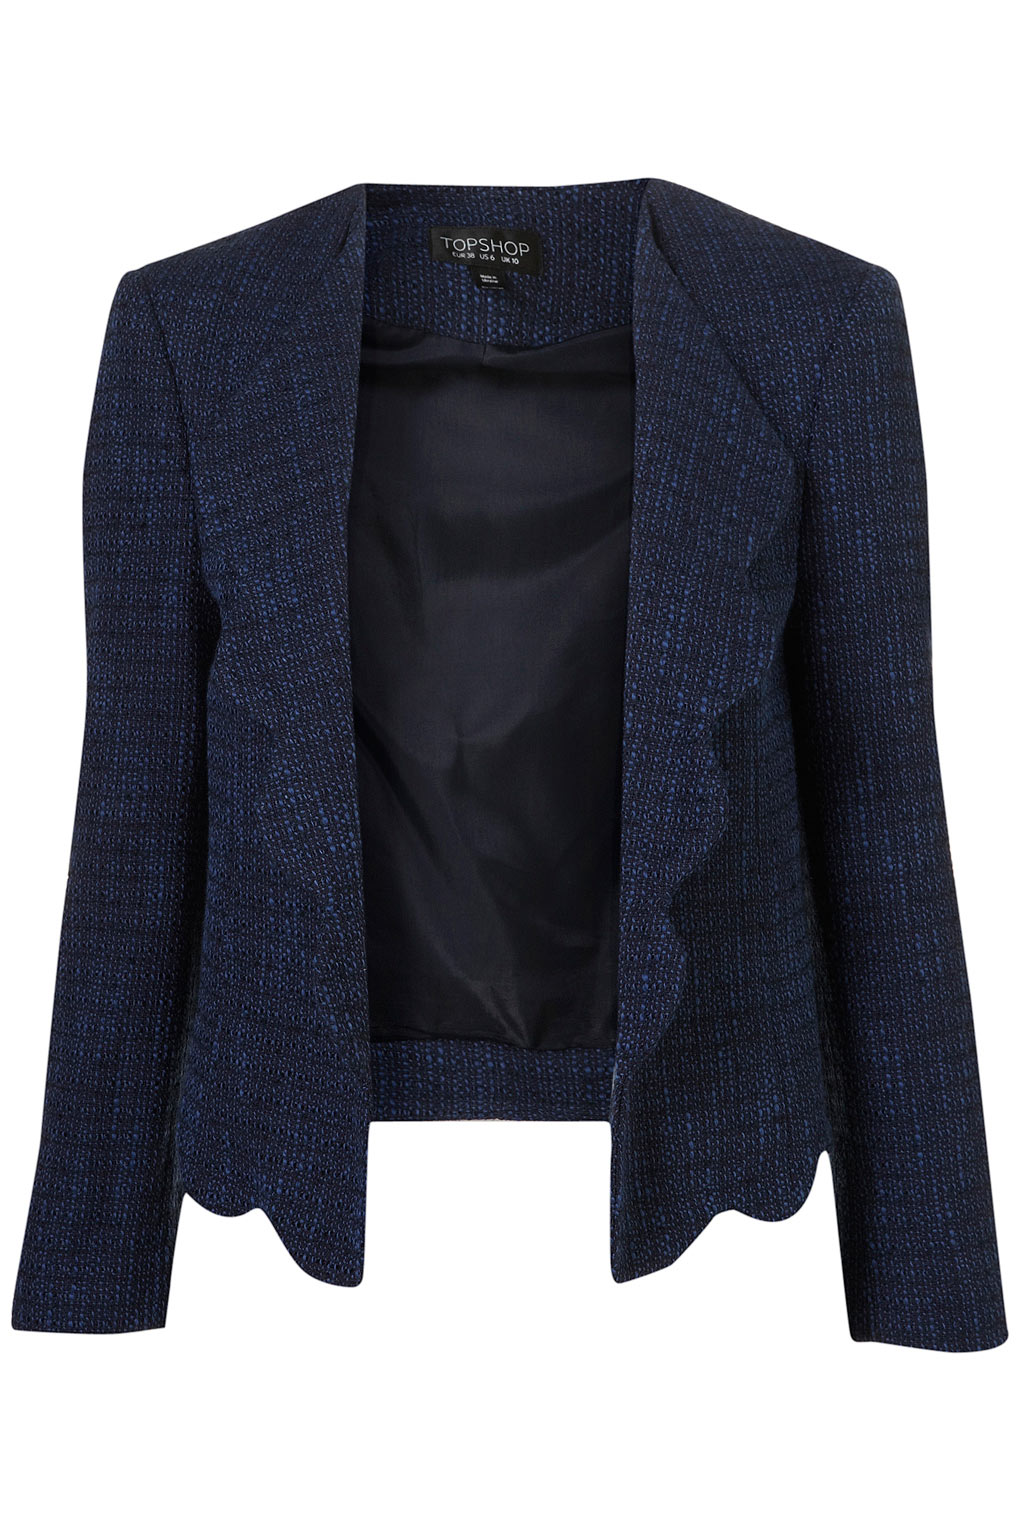 TOPSHOP Co-ord Scallop Boucle Jacket in Navy Blue (Blue) - Lyst